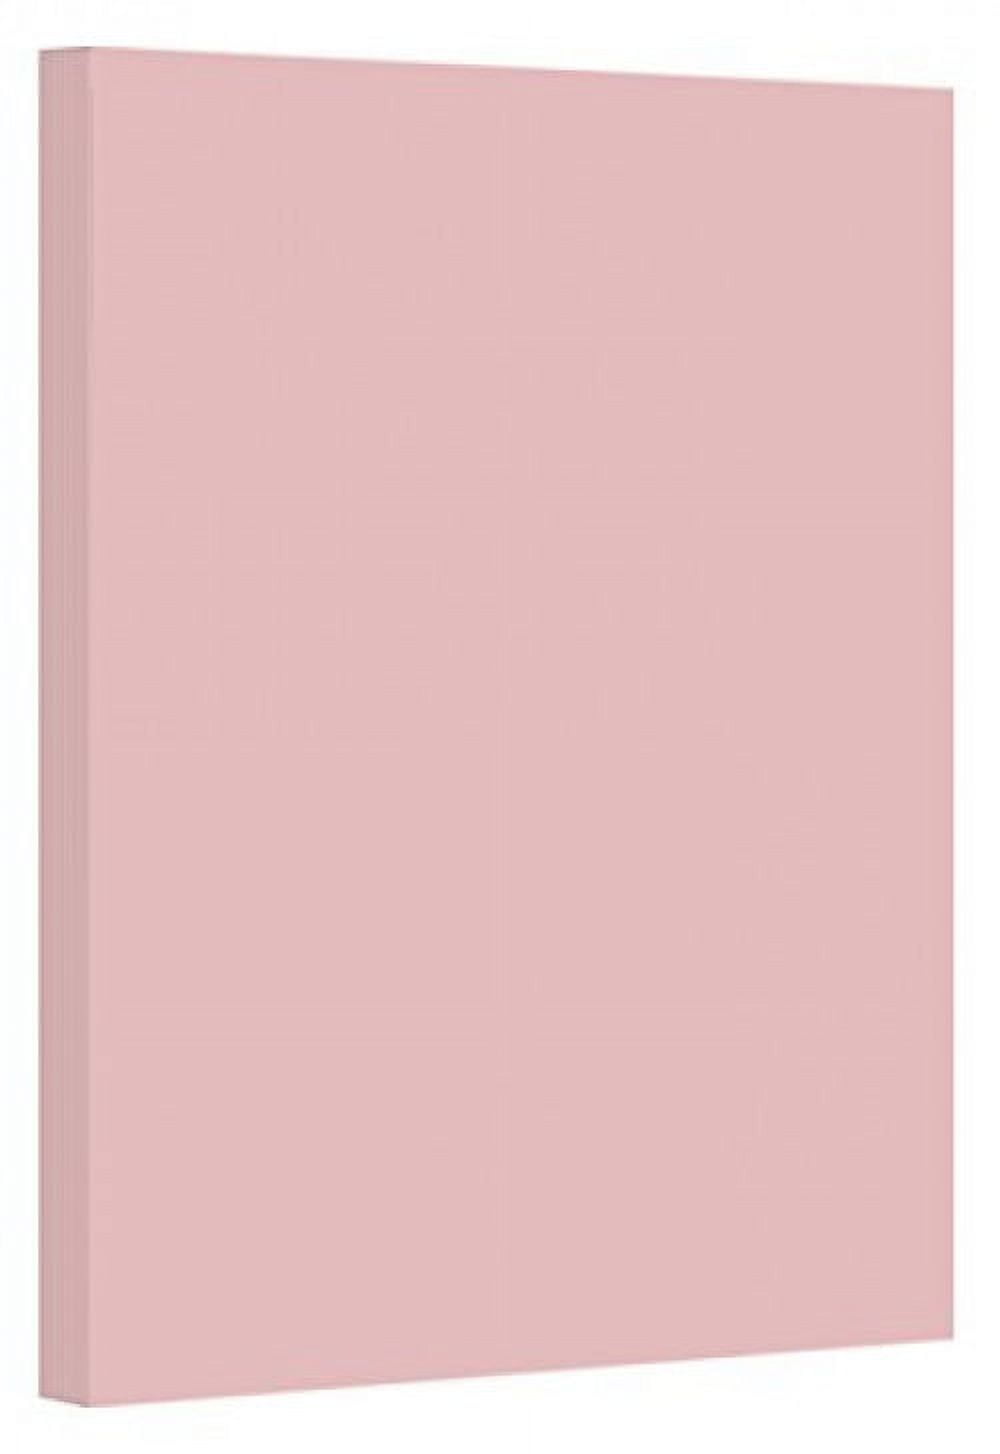 Gray Card Stock Paper - for Stationery Art and Craft, Printing and School  Projects | 8.5 x 11 Pastel Colored Medium Weight Cardstock, 67 LB Vellum